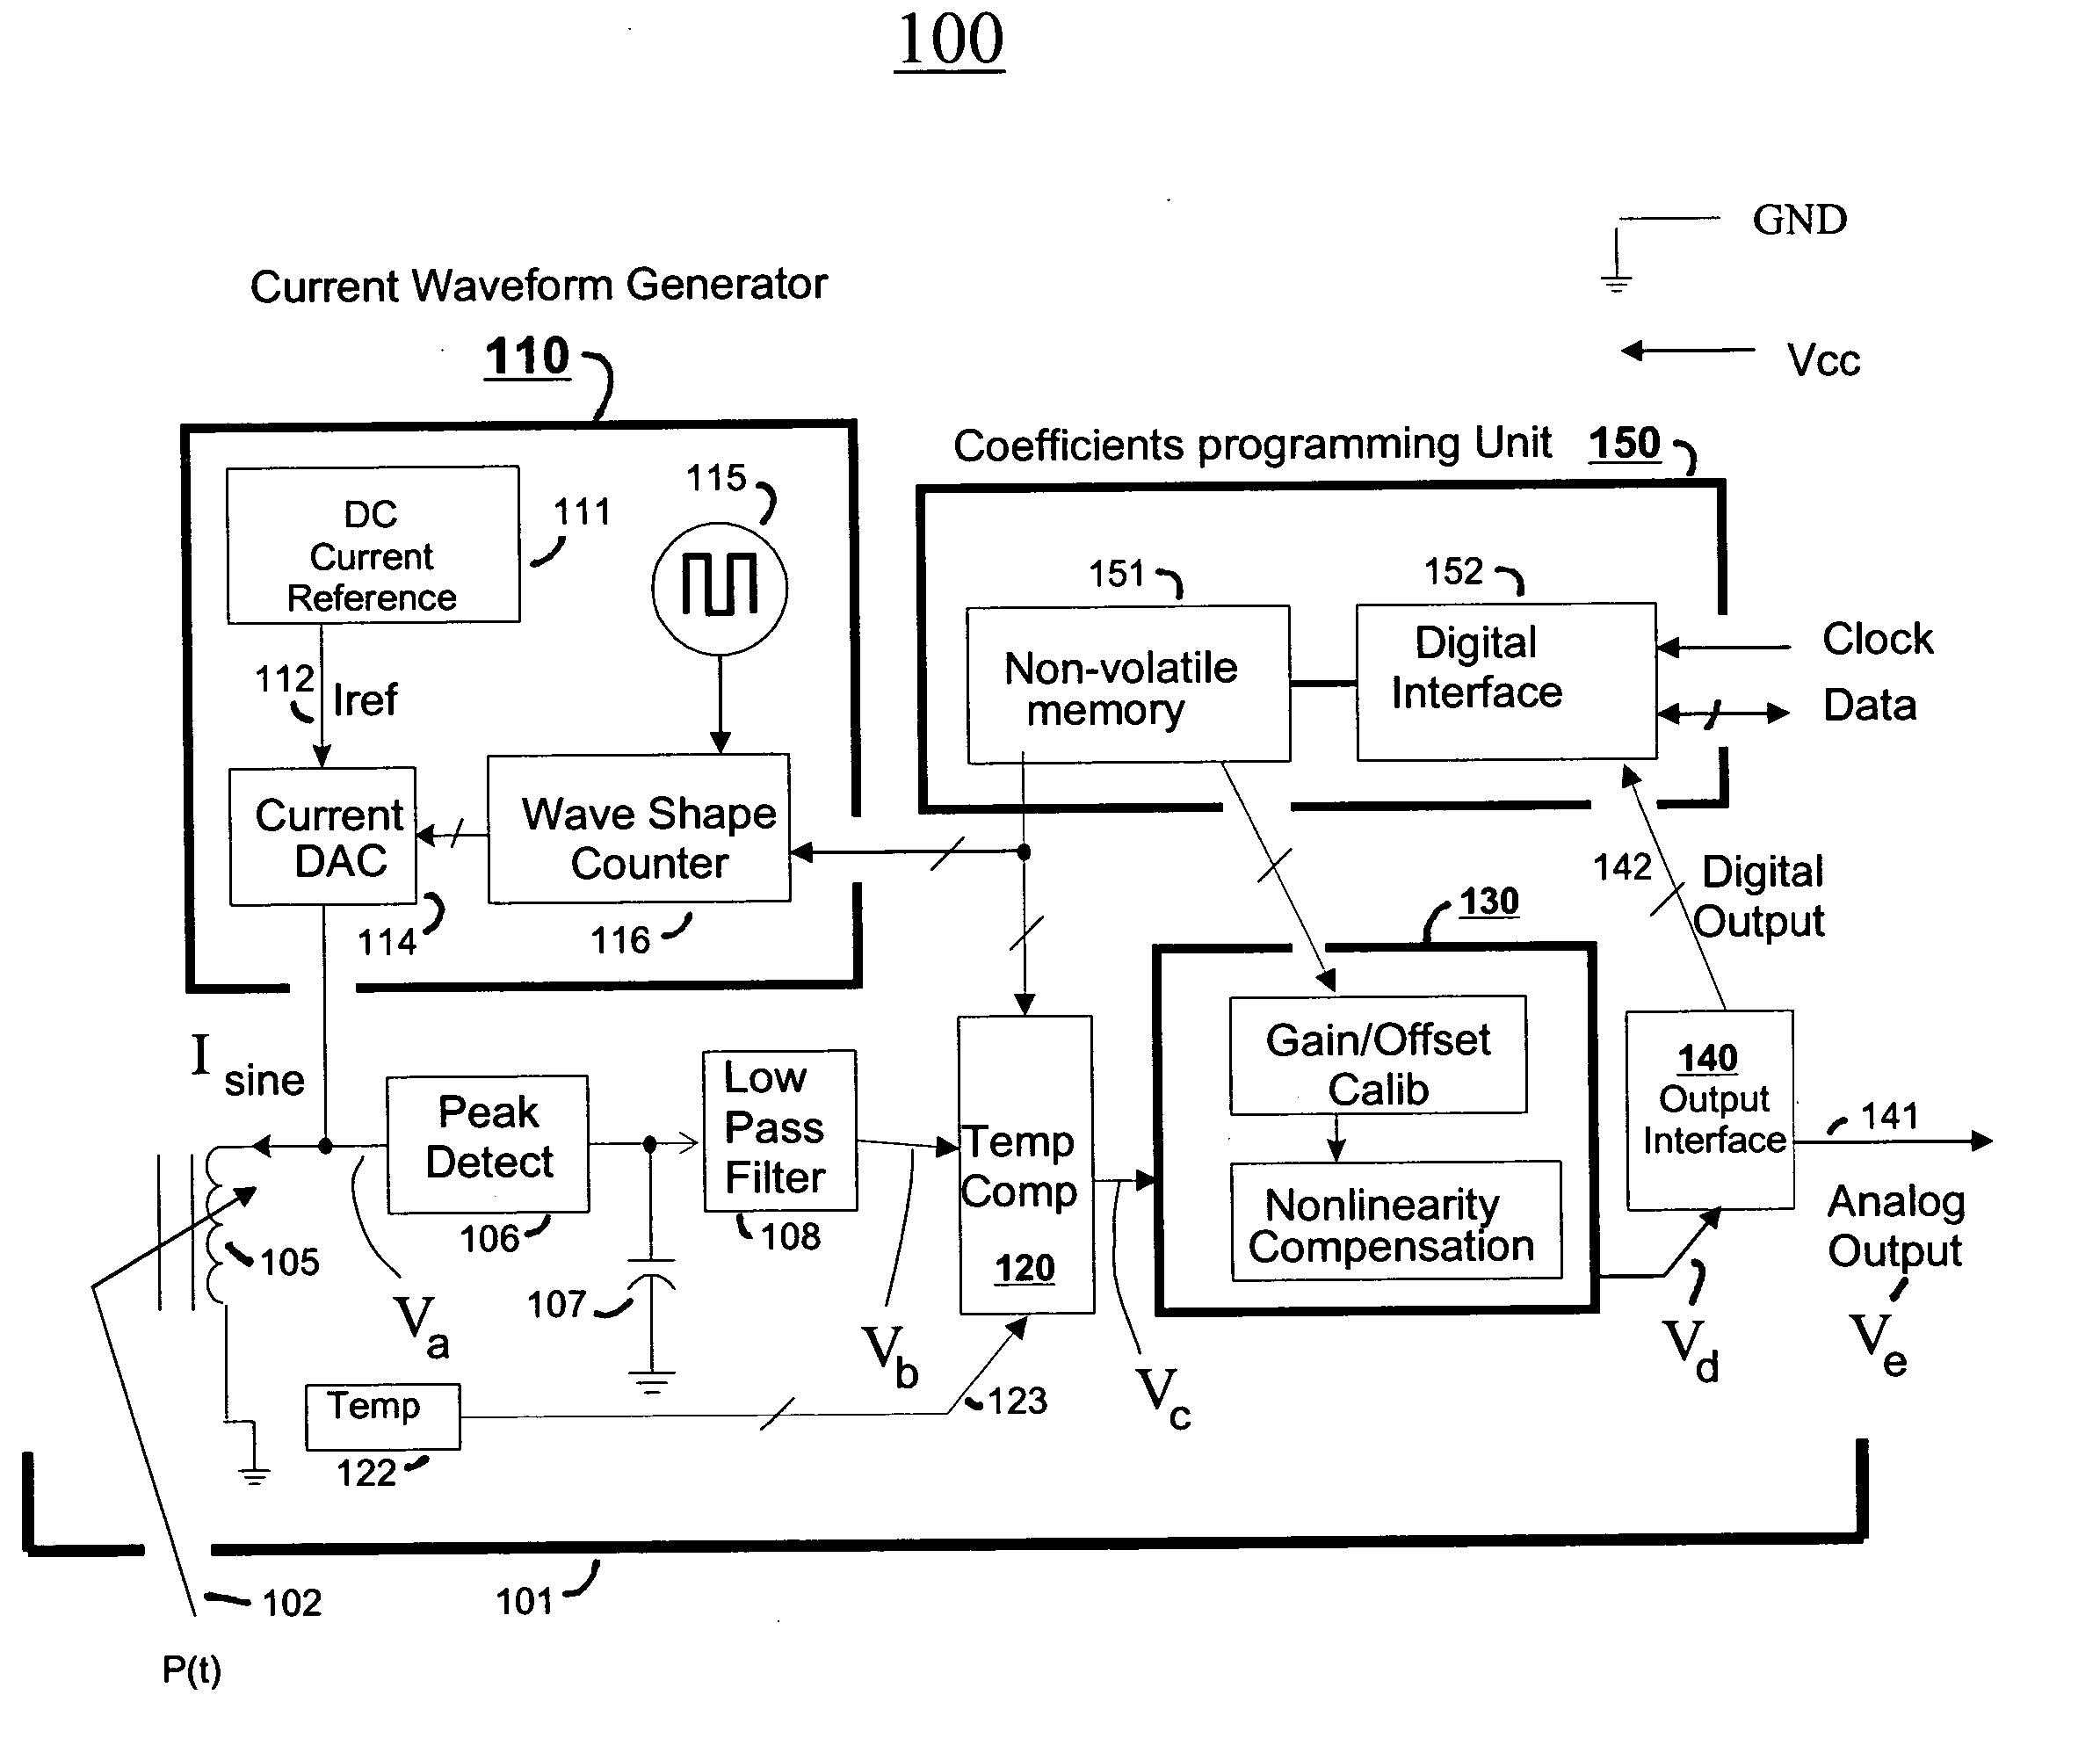 Reactive sensor modules using pade' approximant based compensation and providing module-sourced excitation